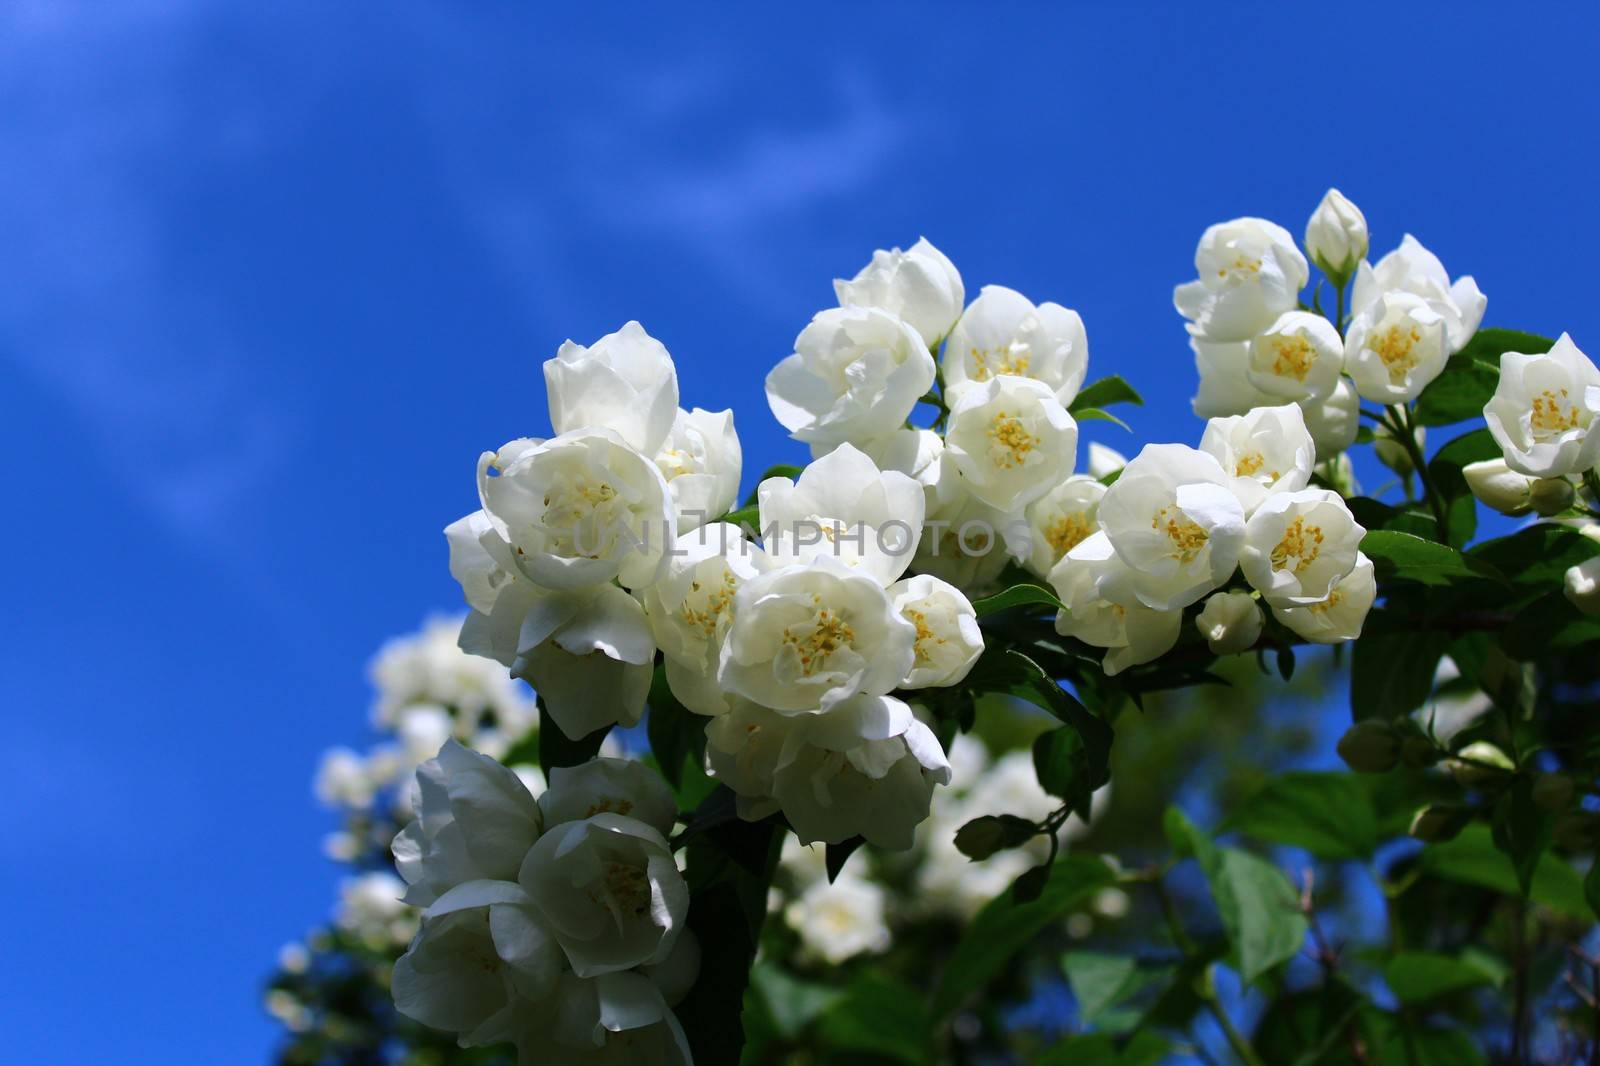 The picture shows white jasmine in the garden.